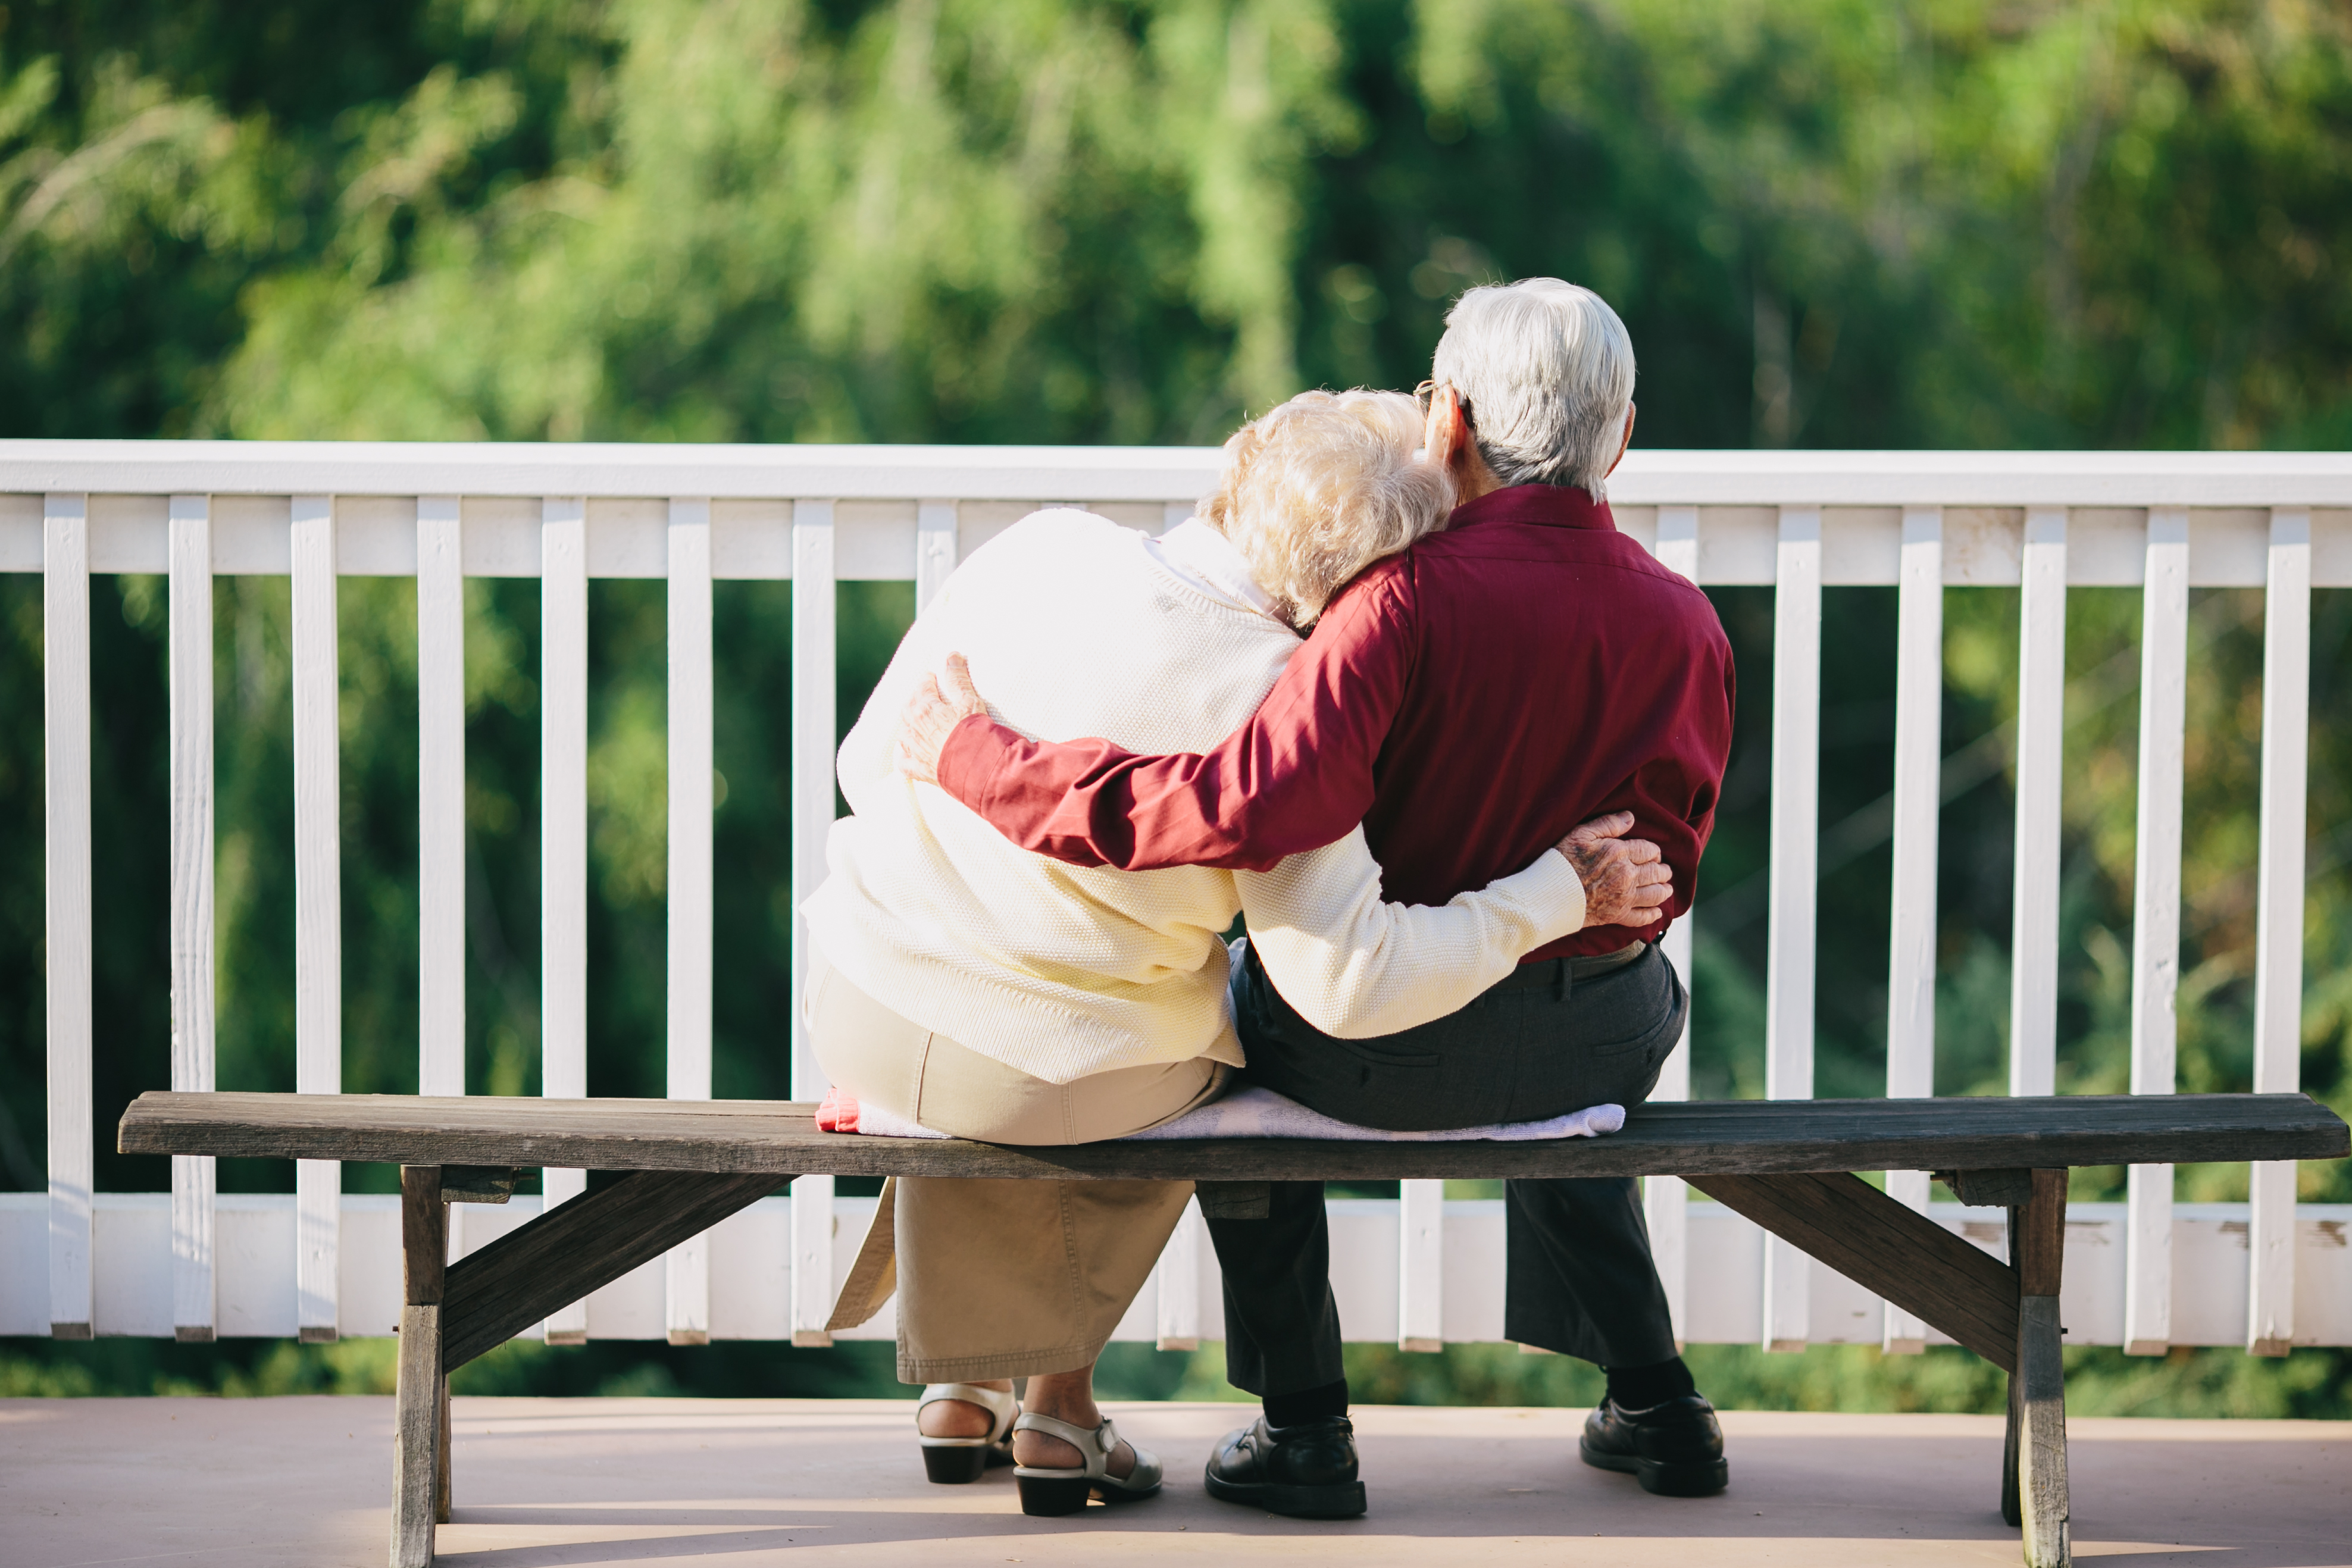 Grandparents sitting on a bench | Source: Shutterstock